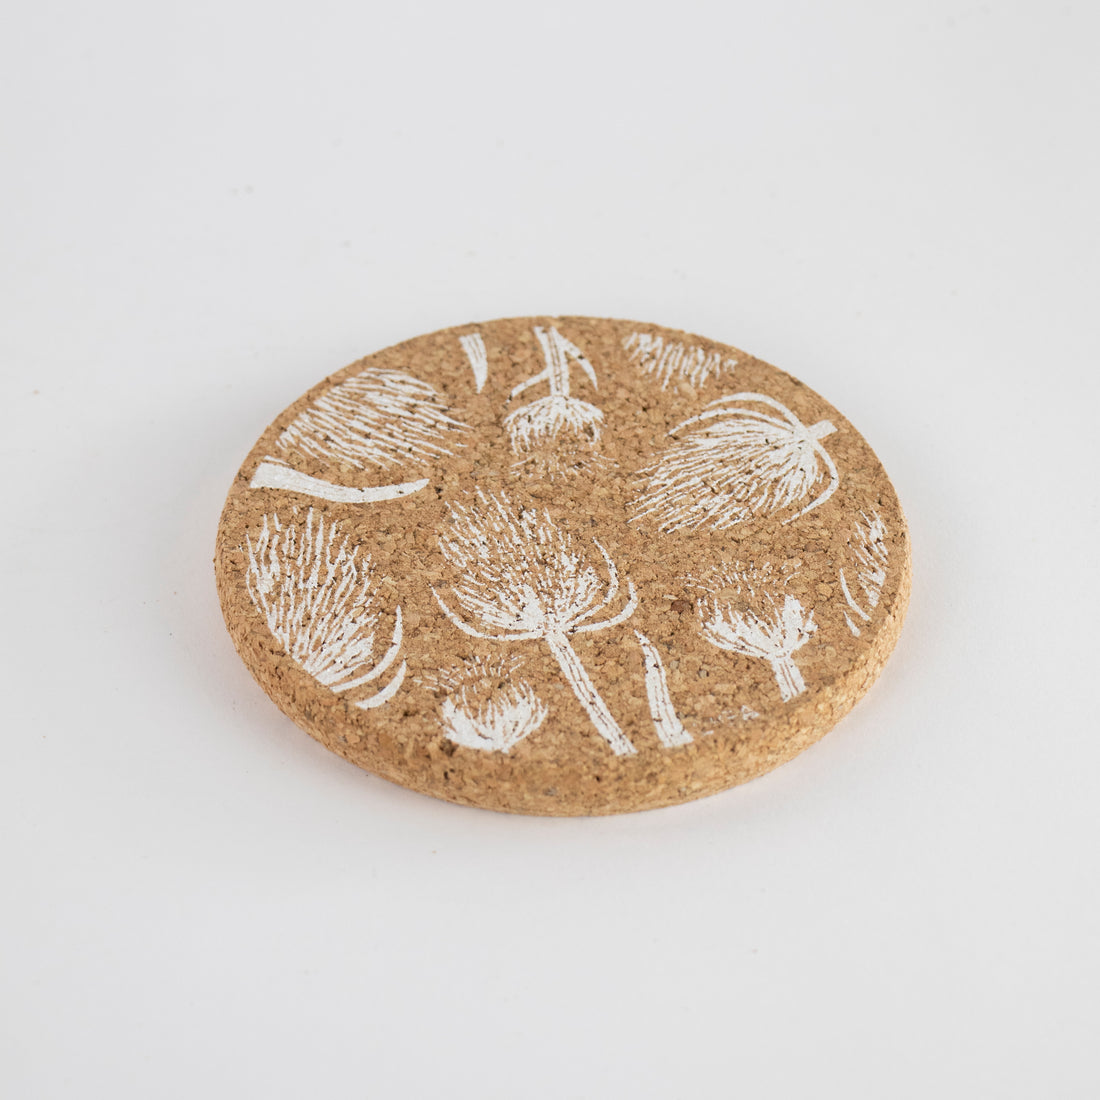 Eco friendly cork coasters. Thistle and Teasel design